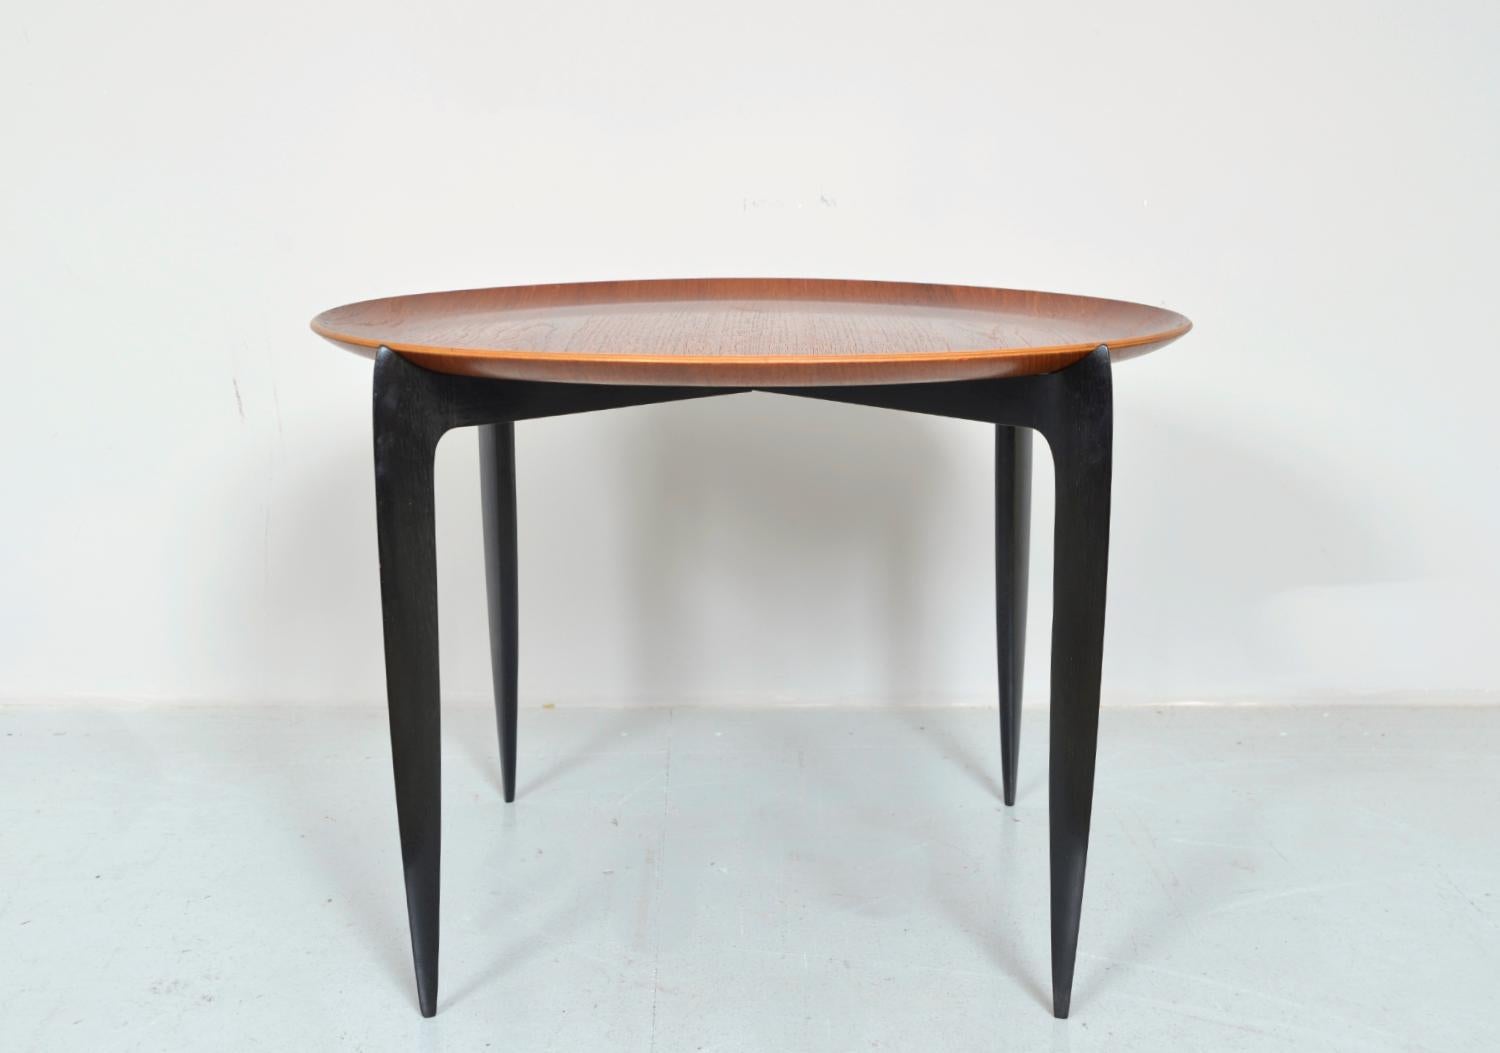 A very stylish teak tray table, model 4508, designed by H. Engholm and Sven Aage Willumsen for Fritz Hansen in 1957. The circular table top tray is beautifully sculpted in teak and simply sits on top of a folding wood base of four sabre legs in